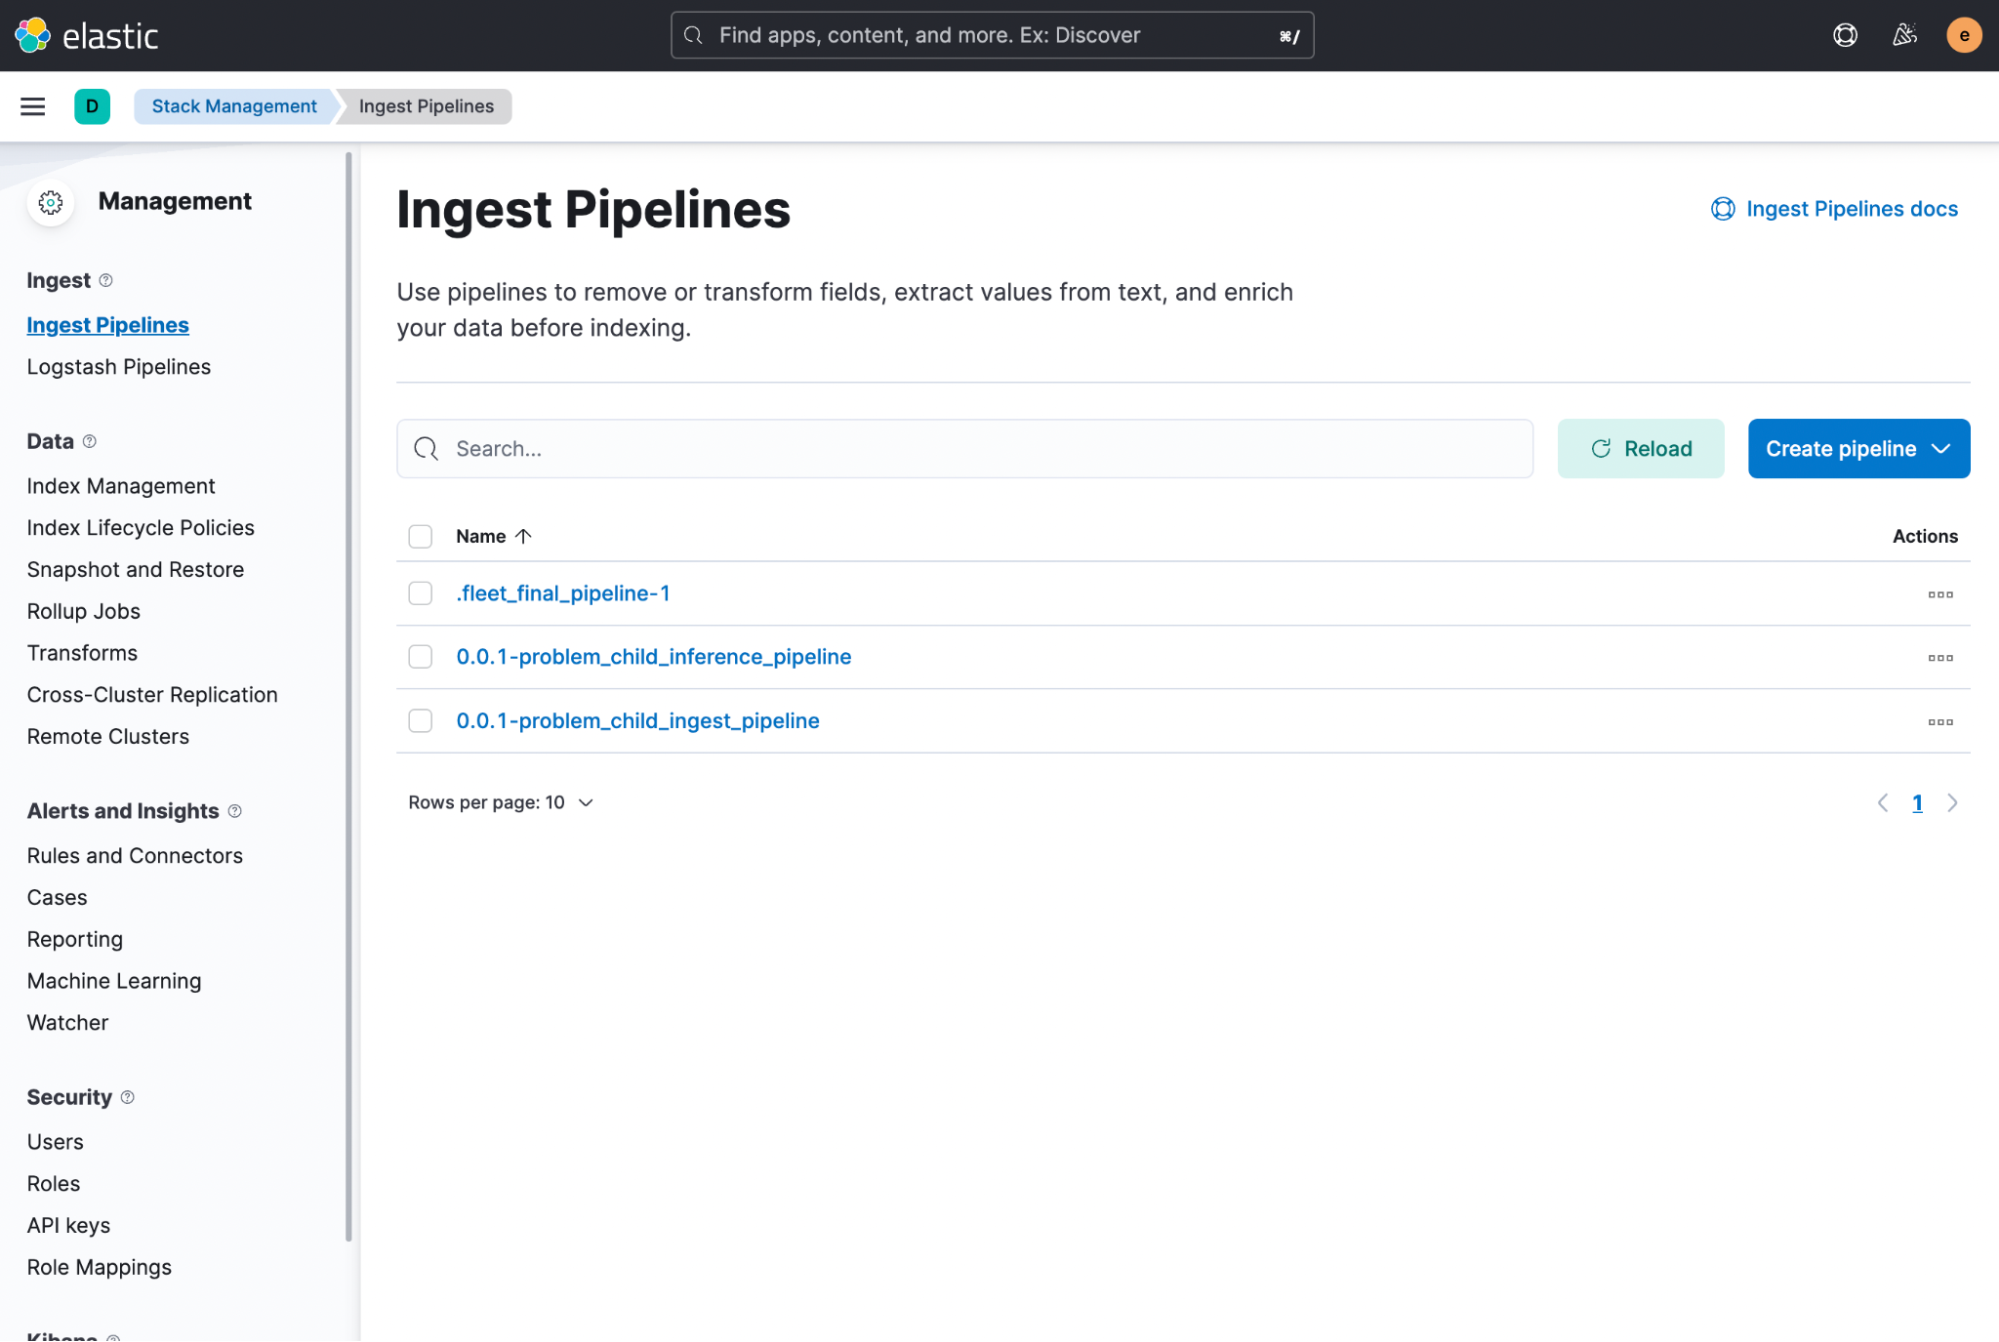 Once installation is complete, you can navigate to Stack Management > Ingest Pipelines and see that the <version-number>-problem_child_ingest_pipeline has been installed and can now be used to enrich incoming ingest data.